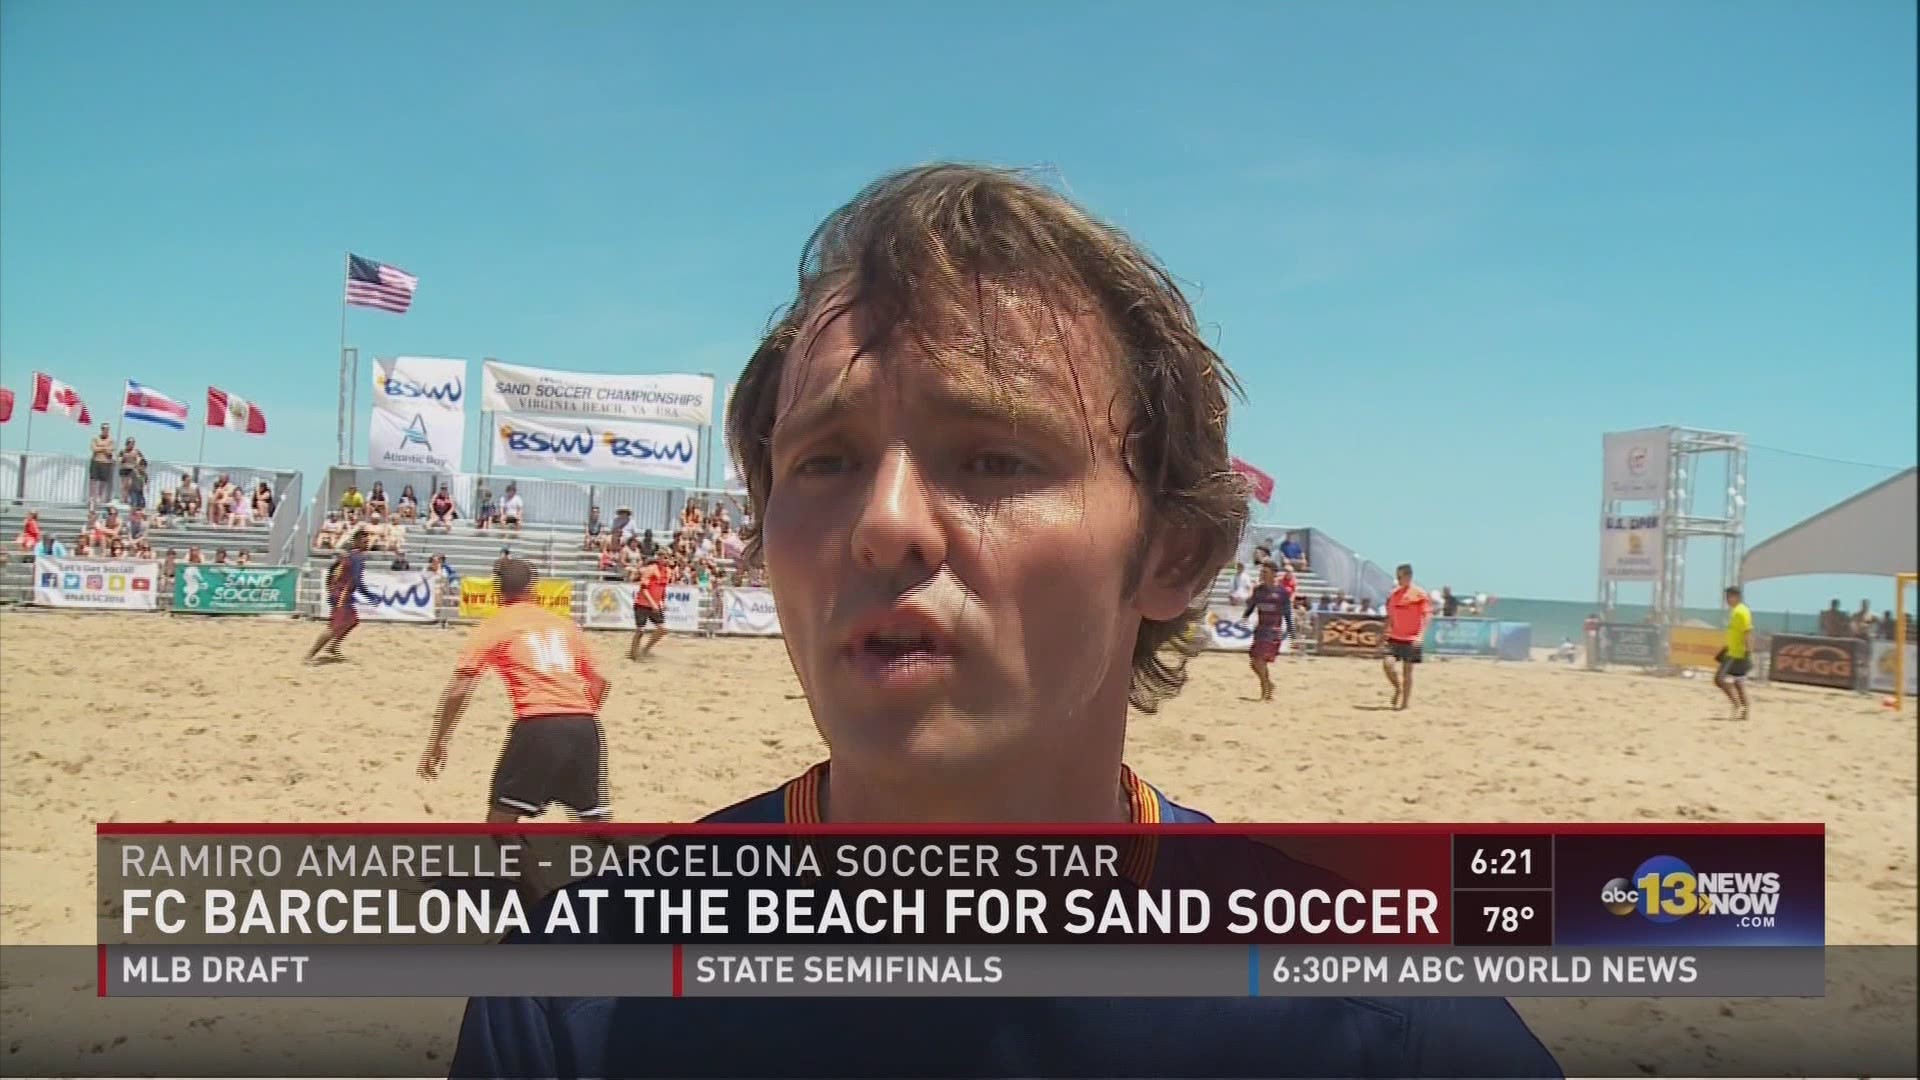 Barcelona puts their talents on display at the North American Sand Soccer championships at the oceanfront.